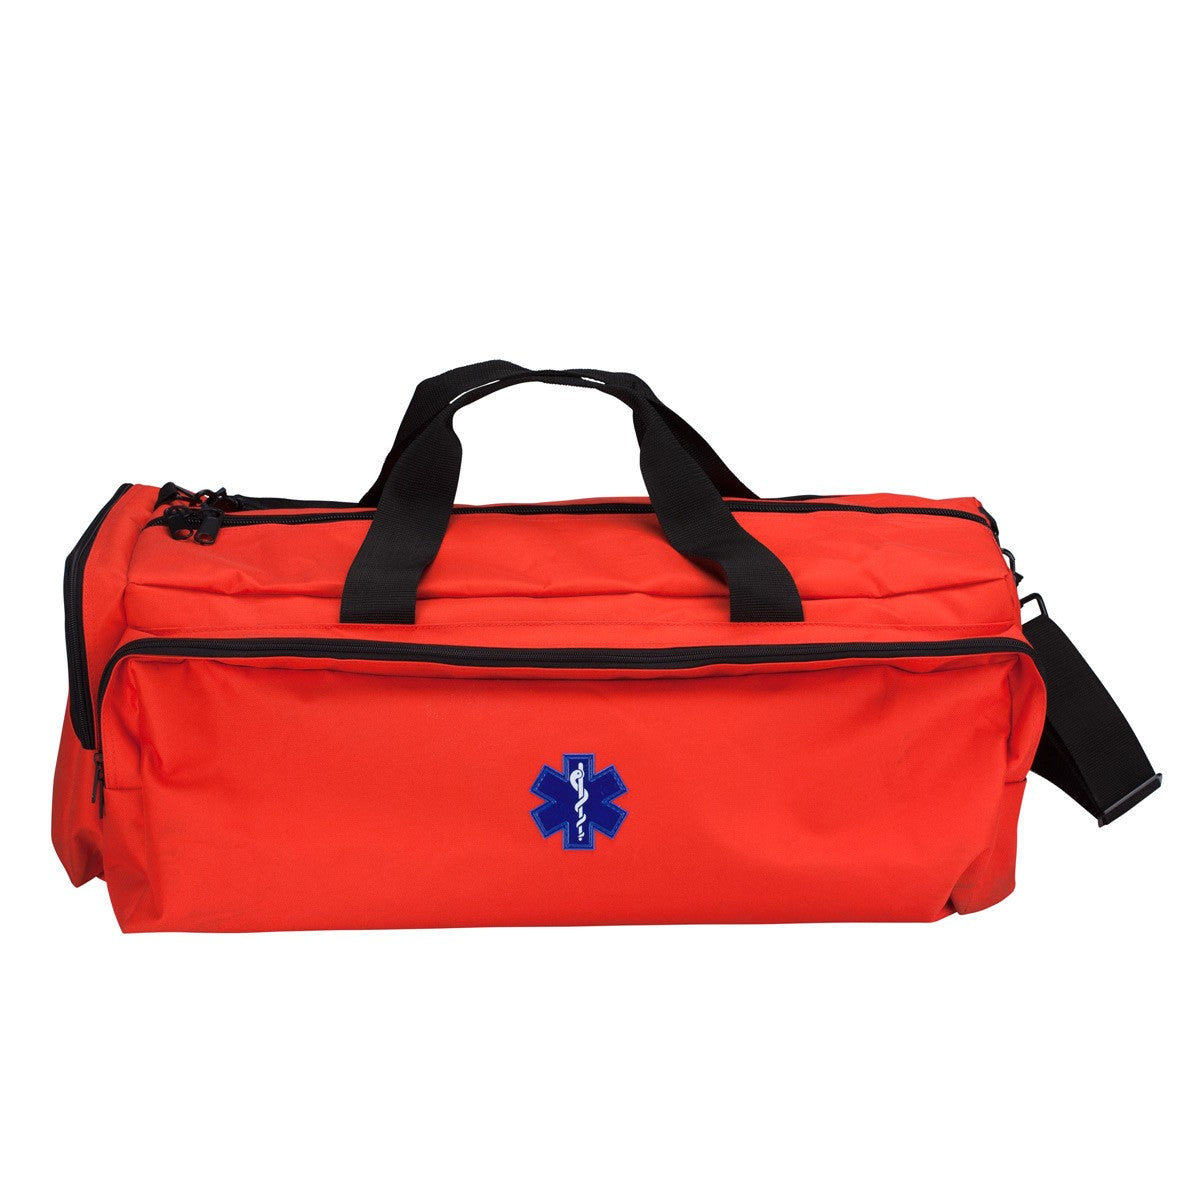 First Responder Kit, Extra Large In Duffle Bag - BS-FAK-90649-1-FM